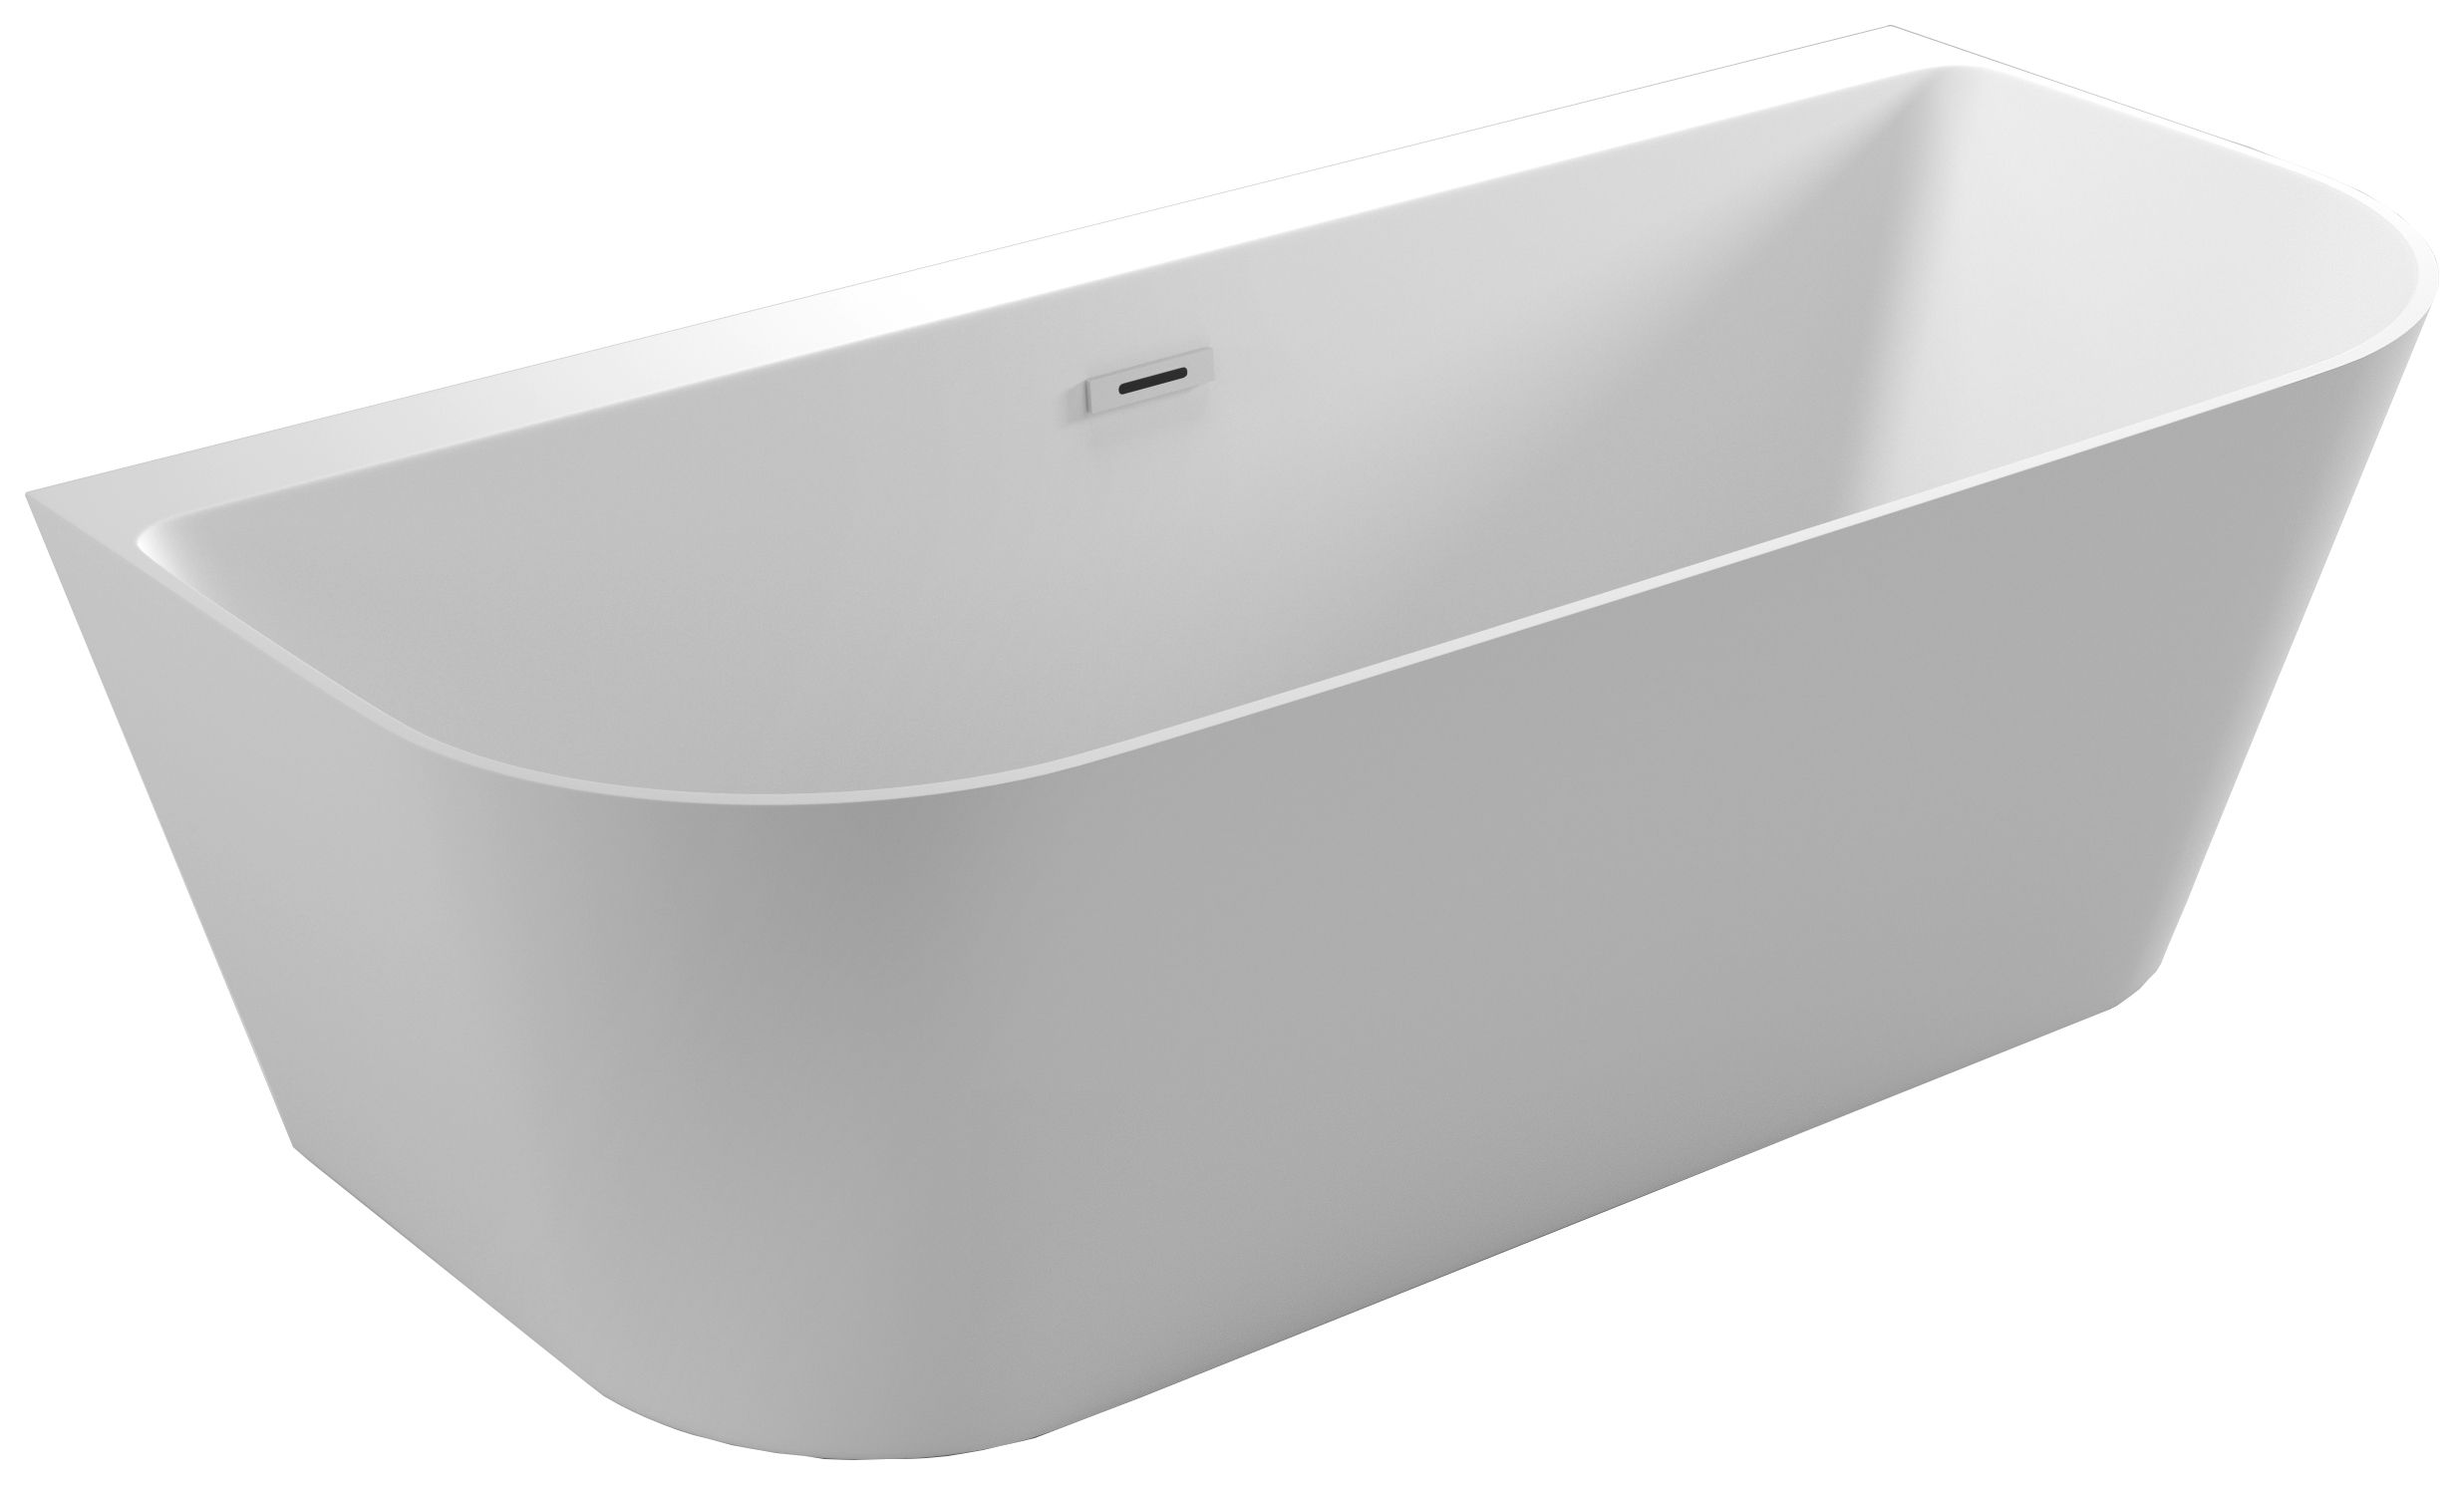 Image of Wickes Boston Back to Wall Freestanding Contemporary Bath - 1700 x 800mm